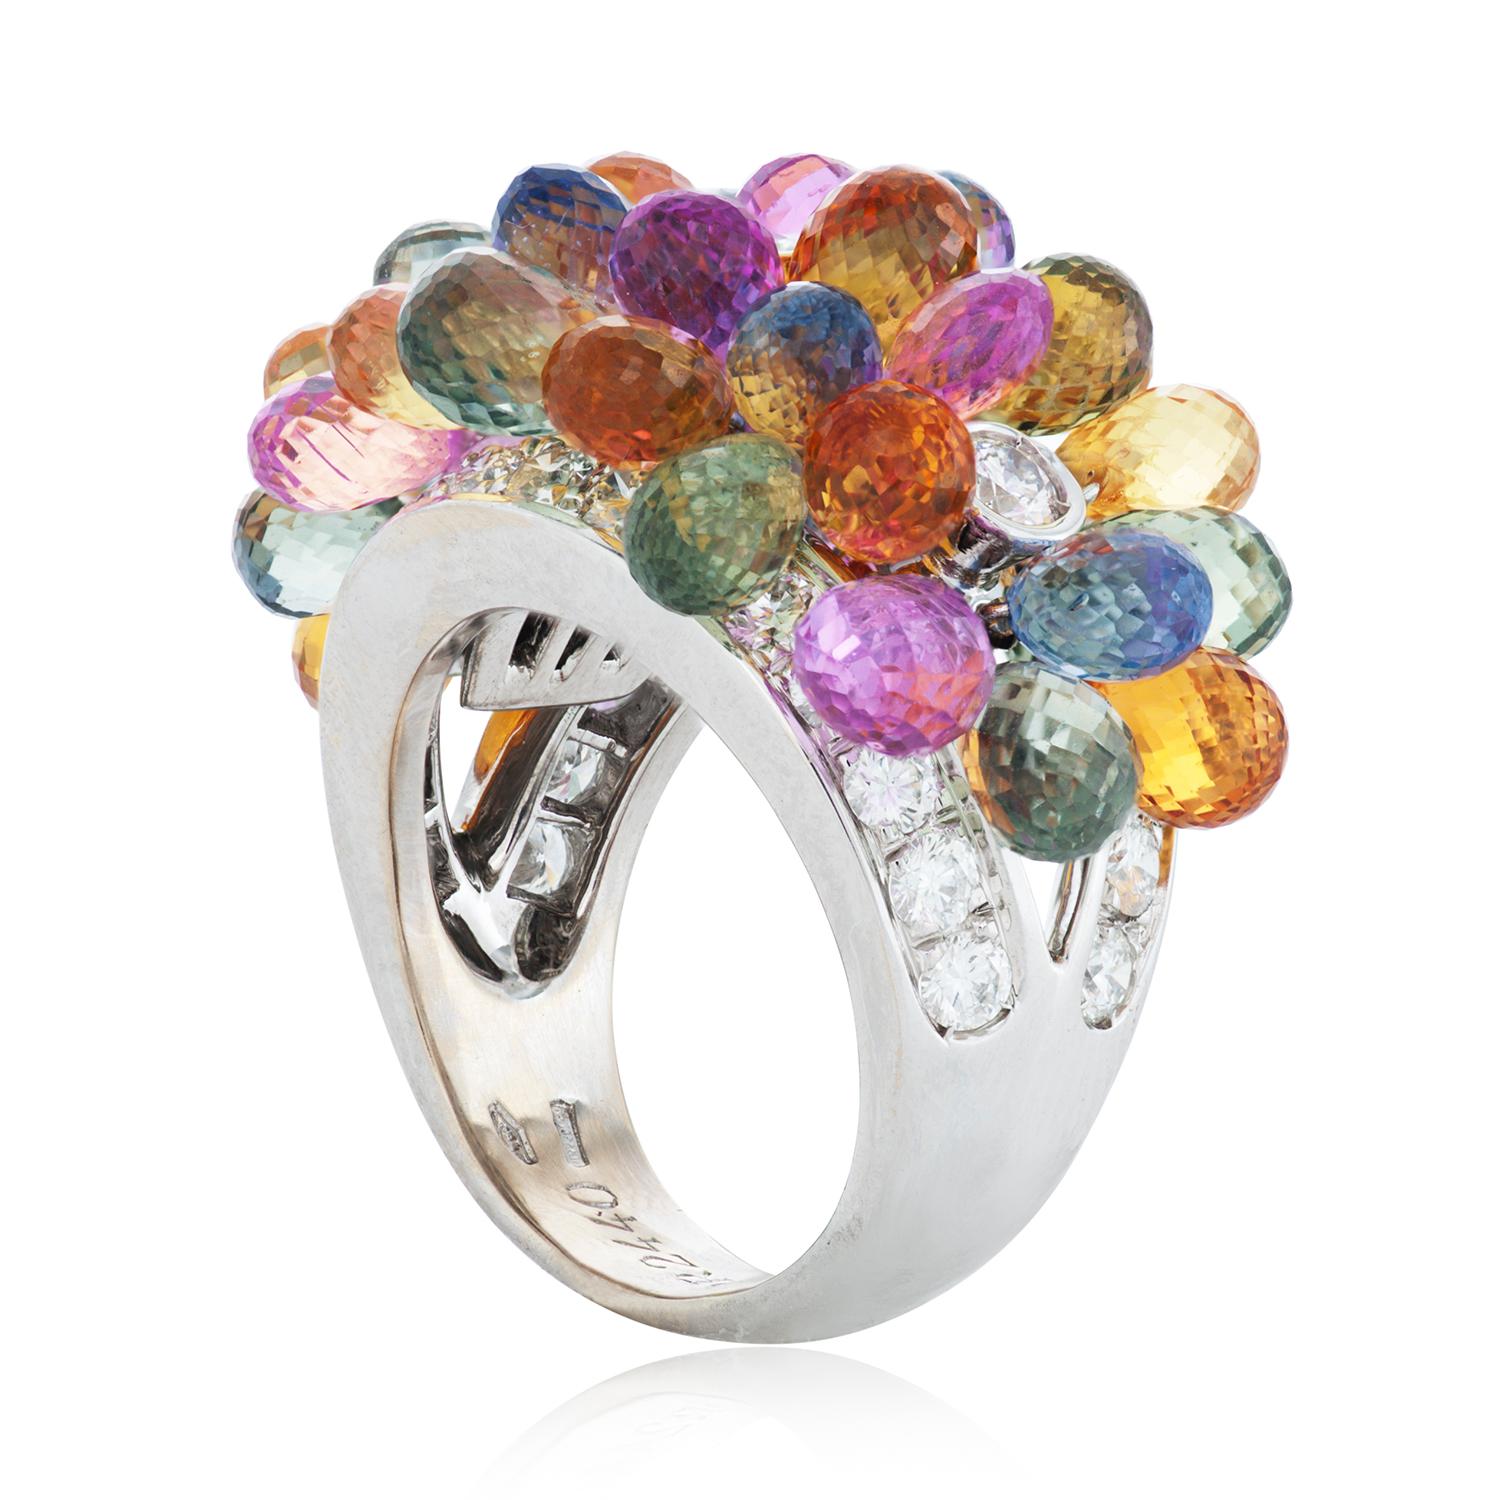 This Graff ring features briolette sapphires in multiple hues of blue, green, yellow, orange and pink.  As well as approximately 1.90 carats of round brilliant cut diamonds F-G color and VS clarity. 

16mm wide.
size 5.75.
Numbered and signed Graff.